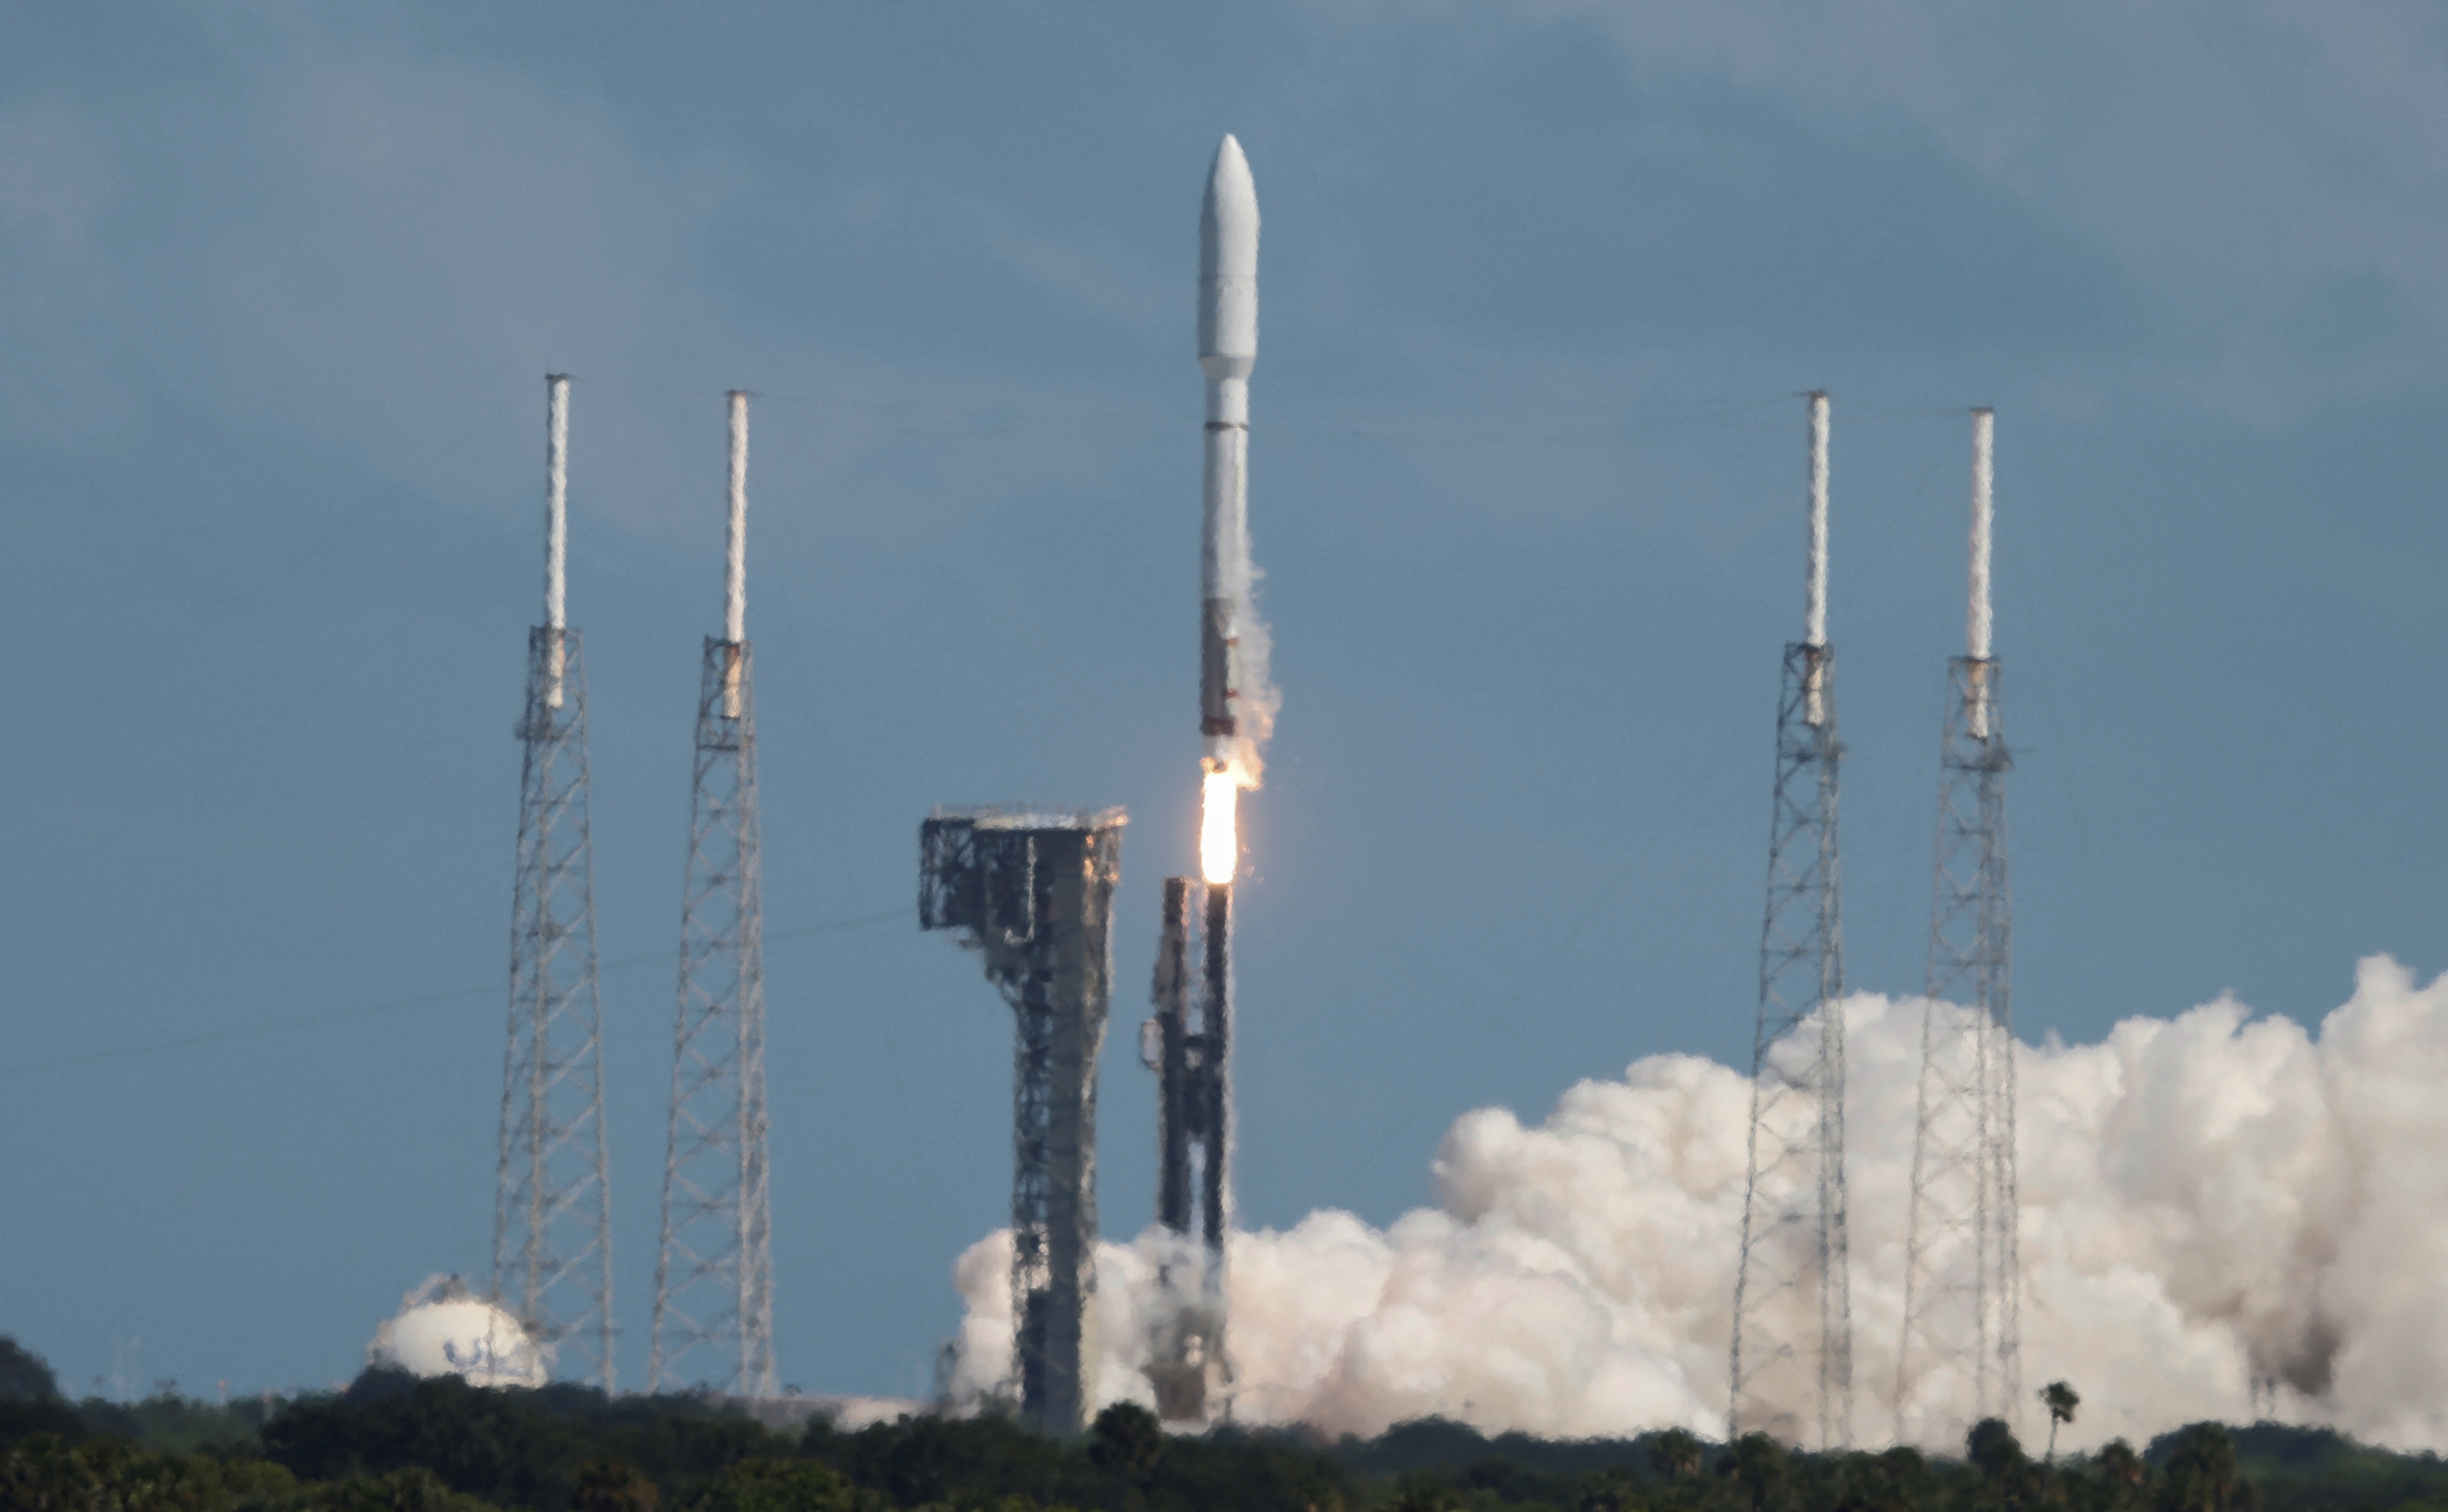 Amazon's internet satellites launched from Cape Canaveral